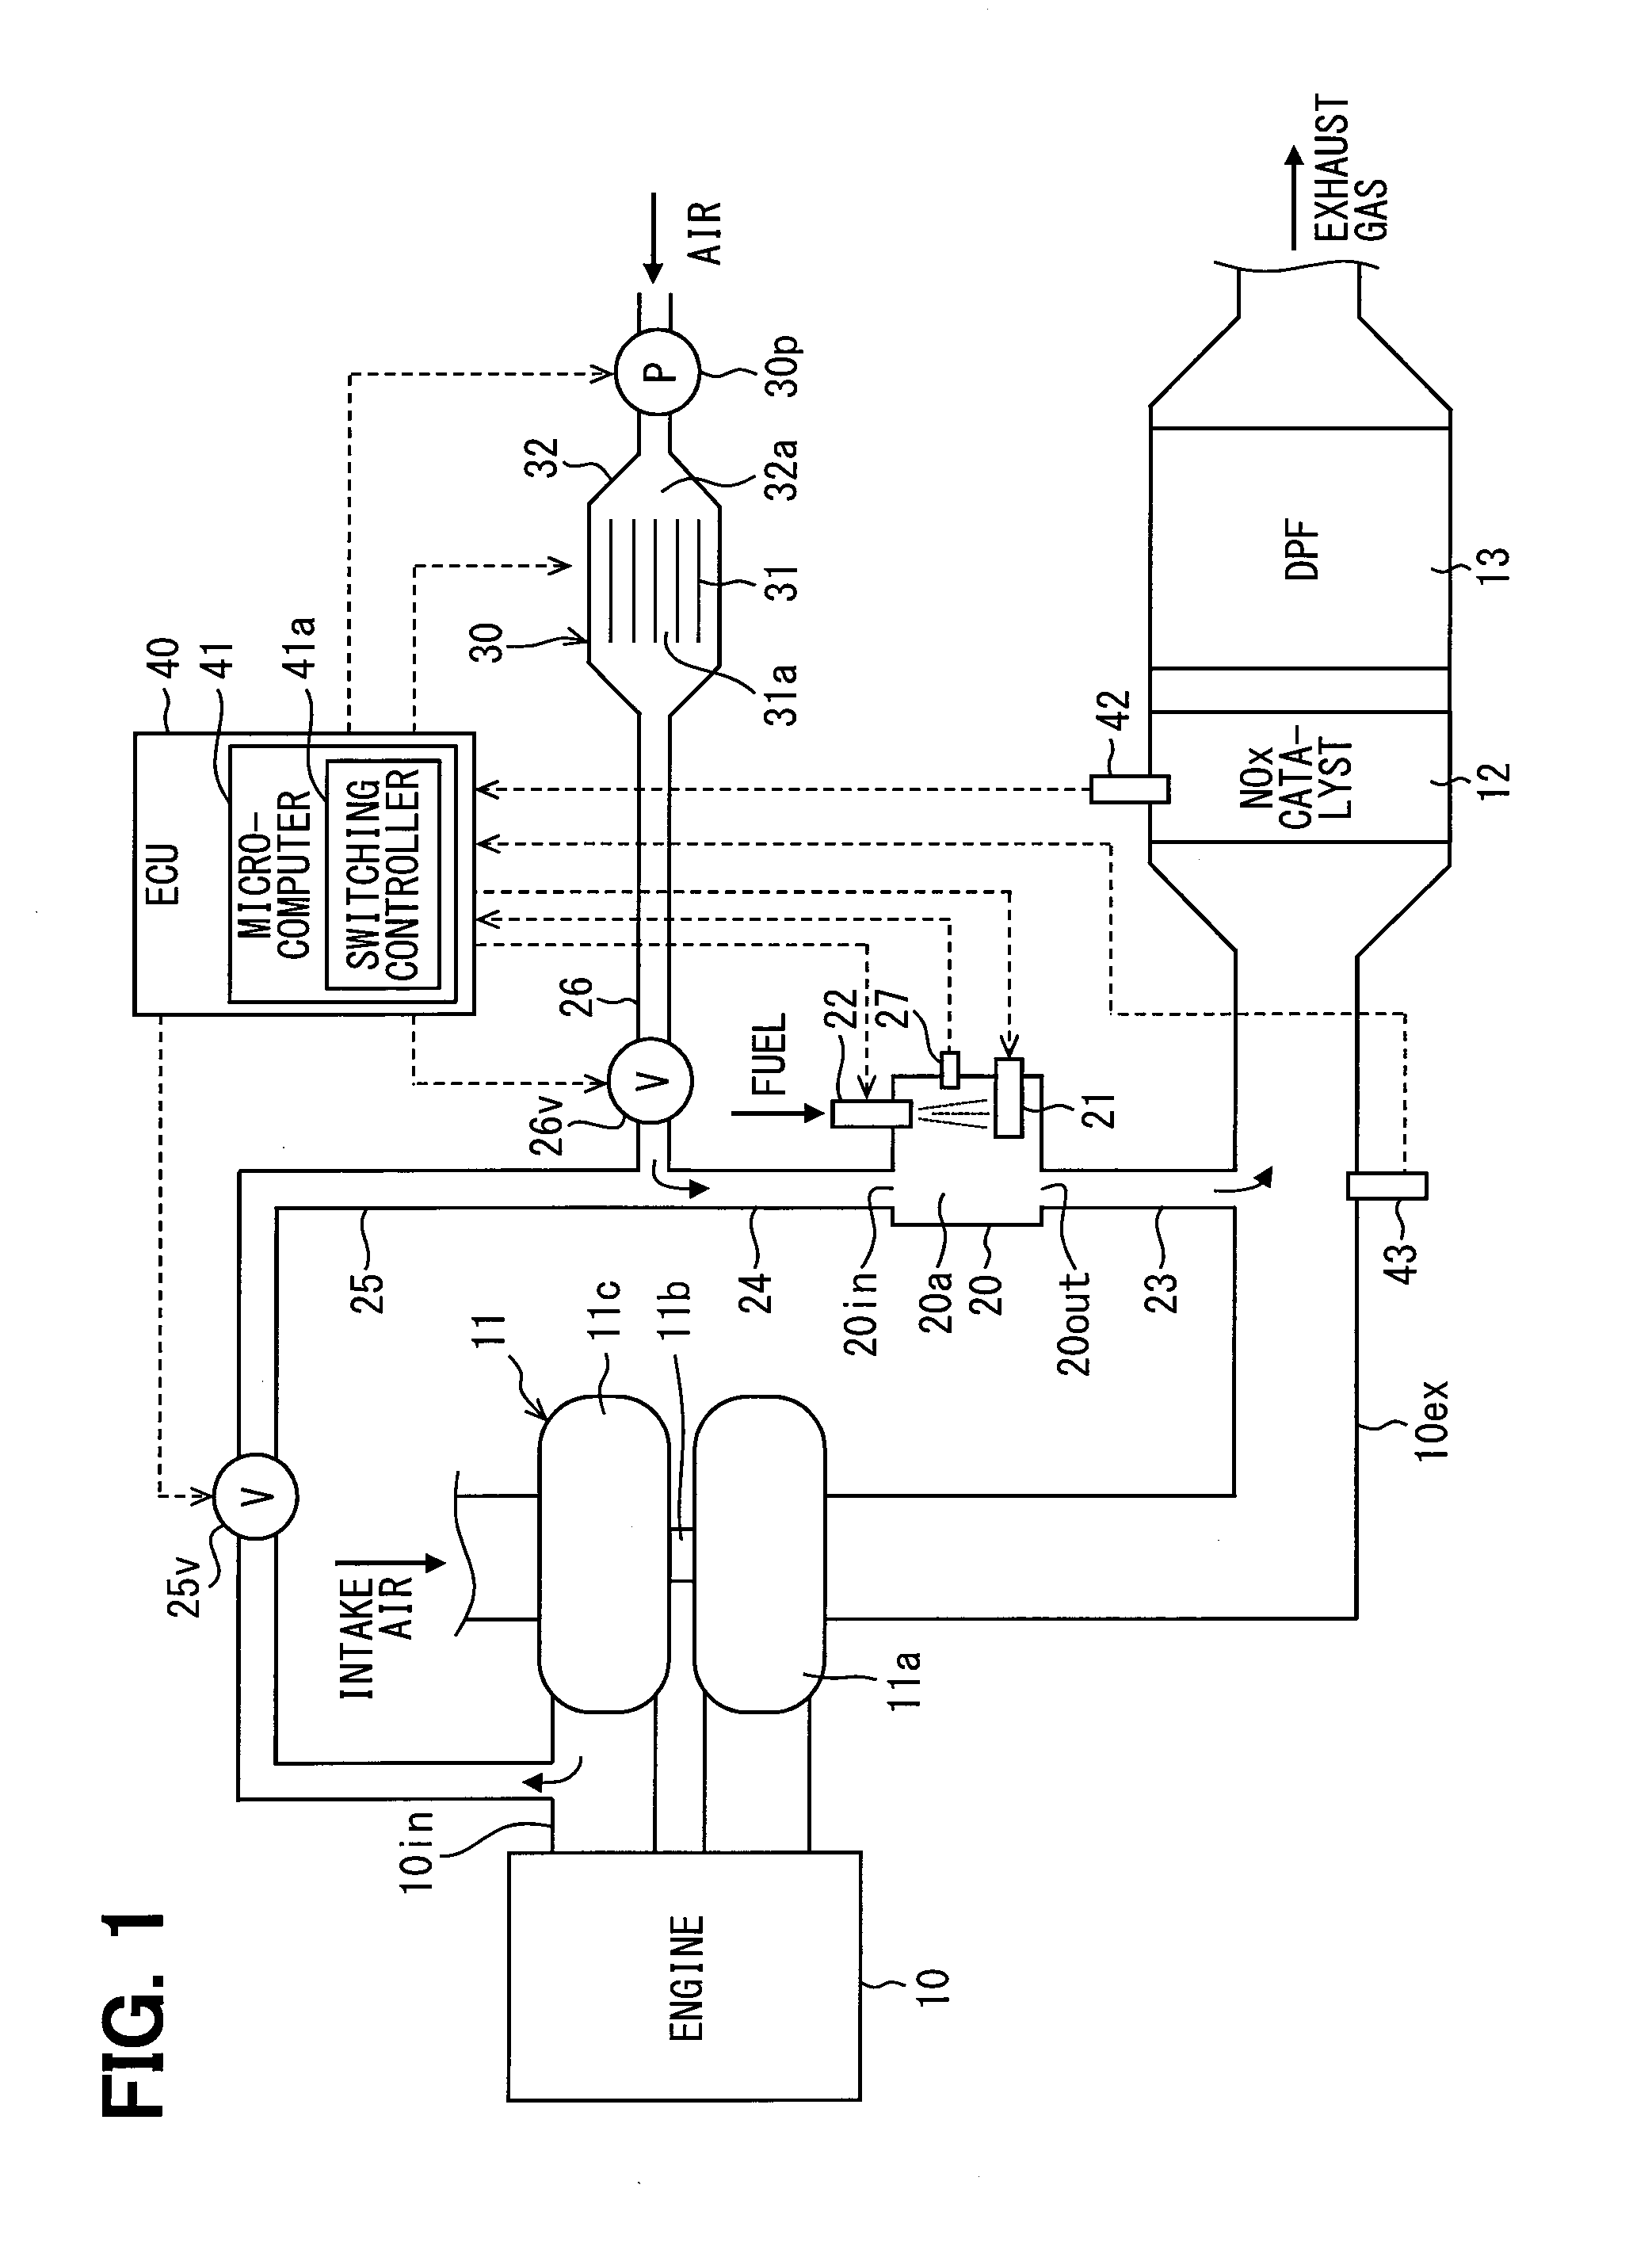 Reducing agent supplying device